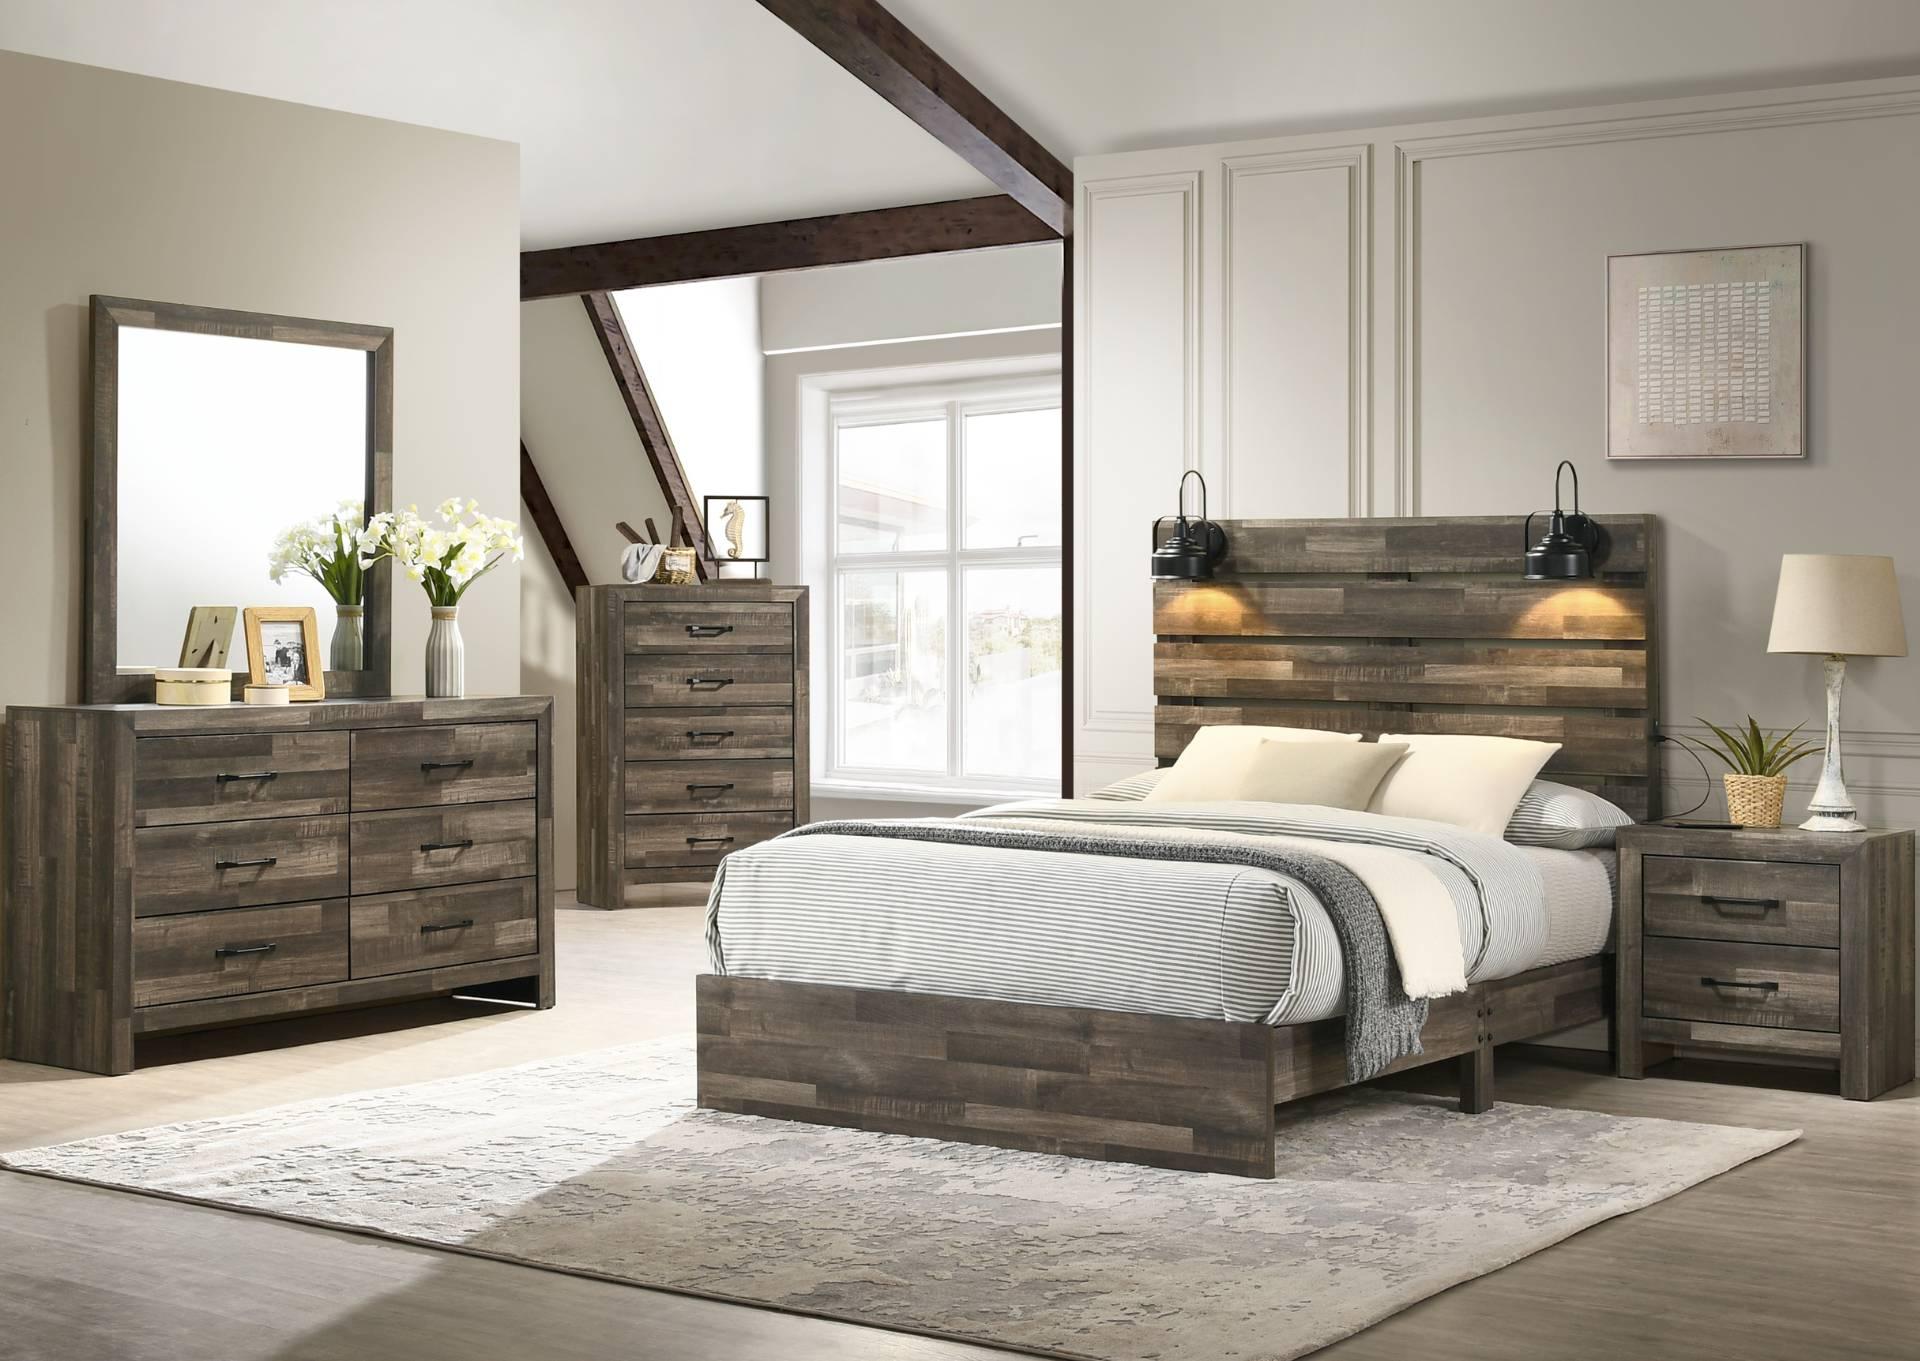 ARIANNA BROWN FULL BEDROOM WITH LIGHTS,LIFESTYLE FURNITURE